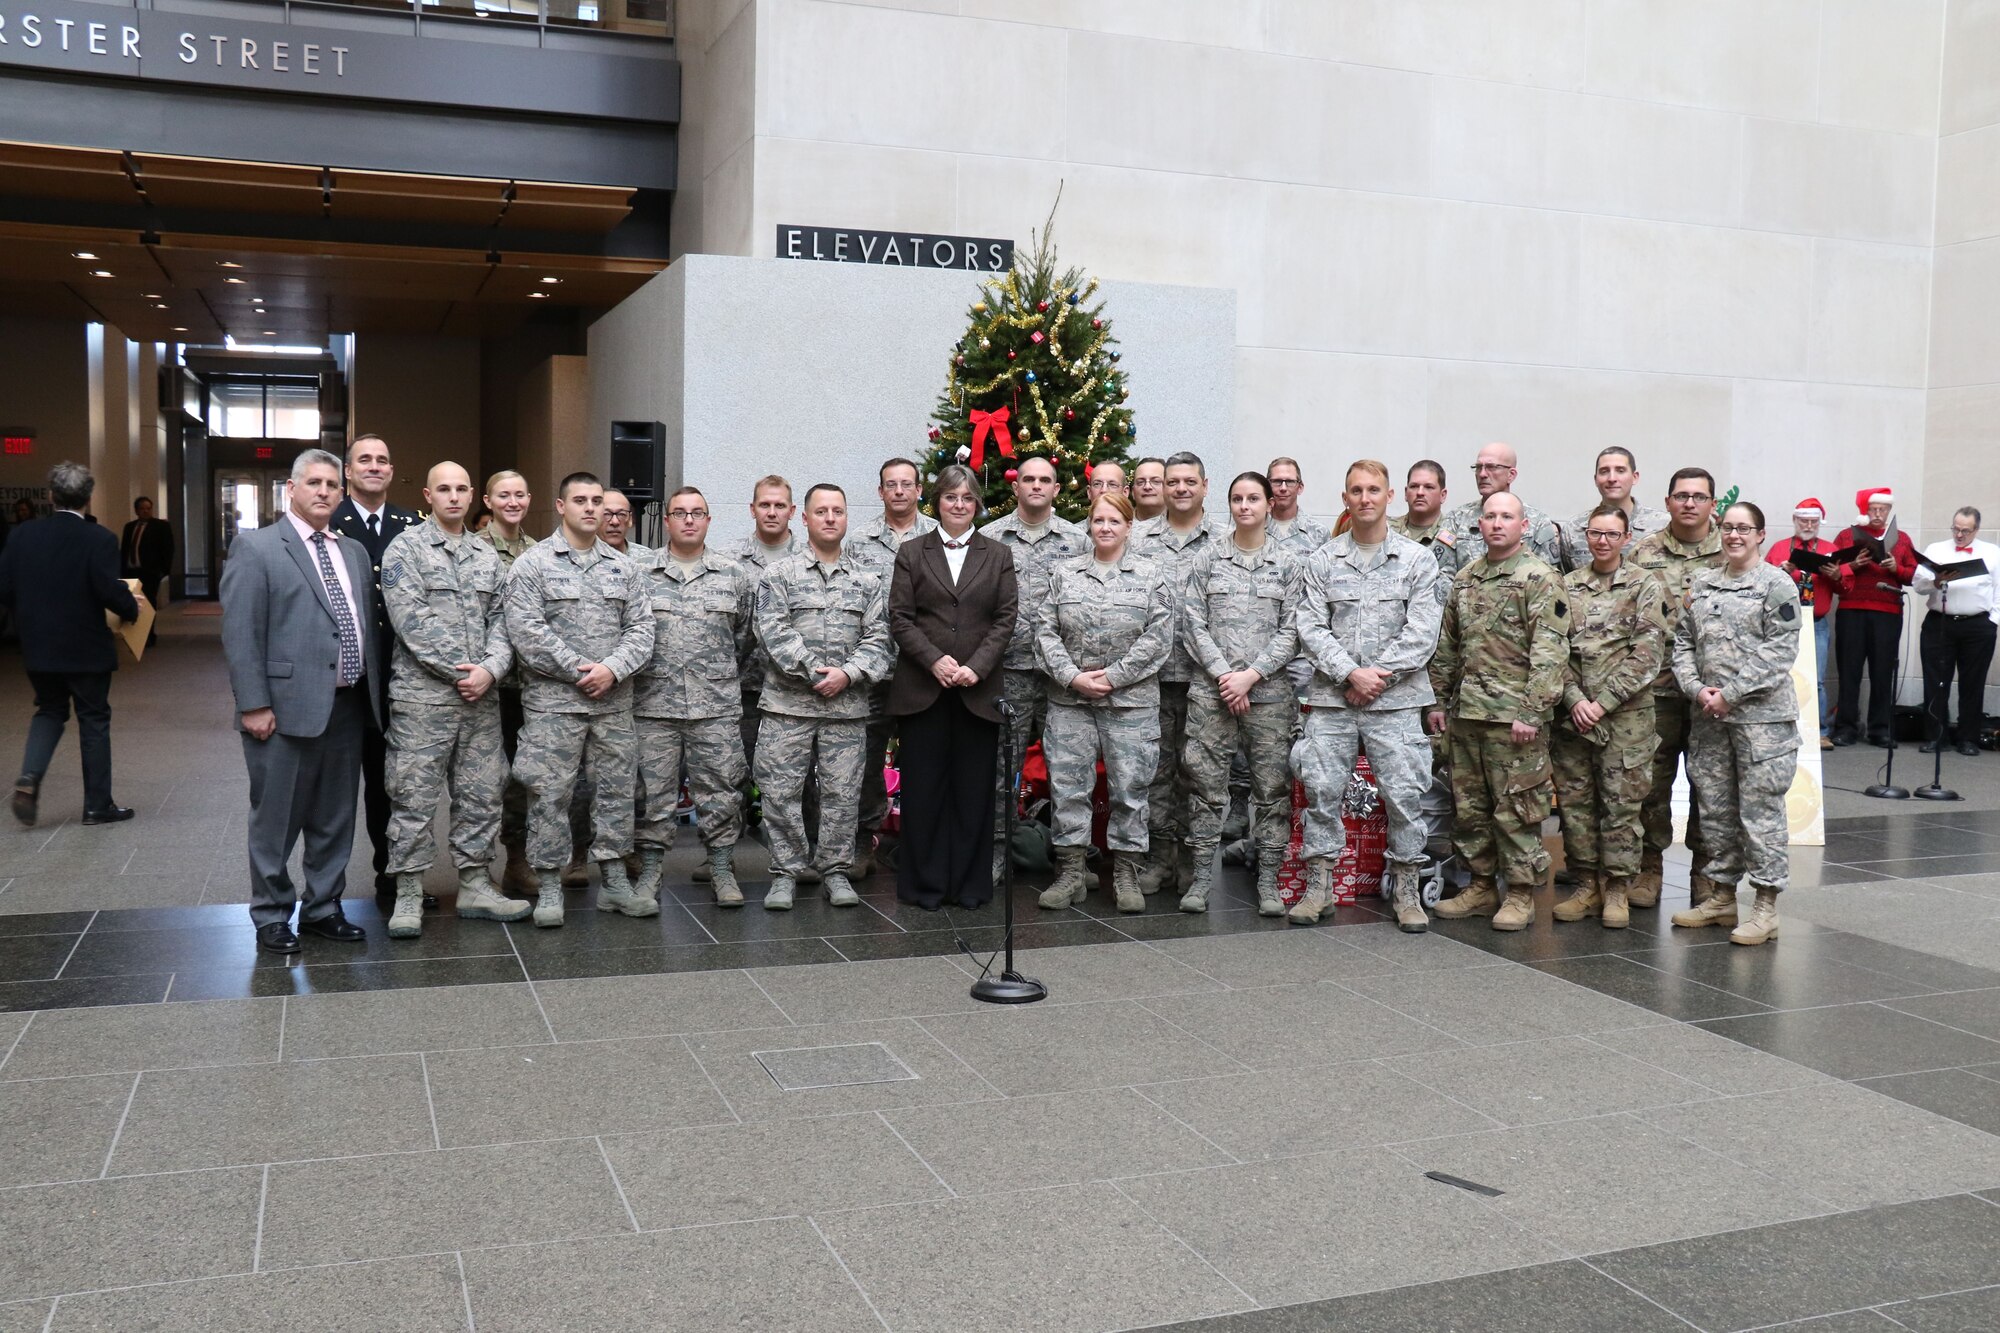 Before loading donated gifts into military vehicles, Pennsylvania National Guardsmen, pose for a group photo with First Lady Frances Wolf, Brig. Gen. David Wood and Gilbert “Dusty” Durand II, during the 28th annual Holiday Wish Program held at the Keystone Building, Harrisburg, Pennsylvania, Dec. 6, 2017. The Guardsmen delivered the gifts to participating county assistance offices for distribution to families and individuals.  (U.S. Air National Guard photo by Master Sgt. Culeen Shaffer/Released)